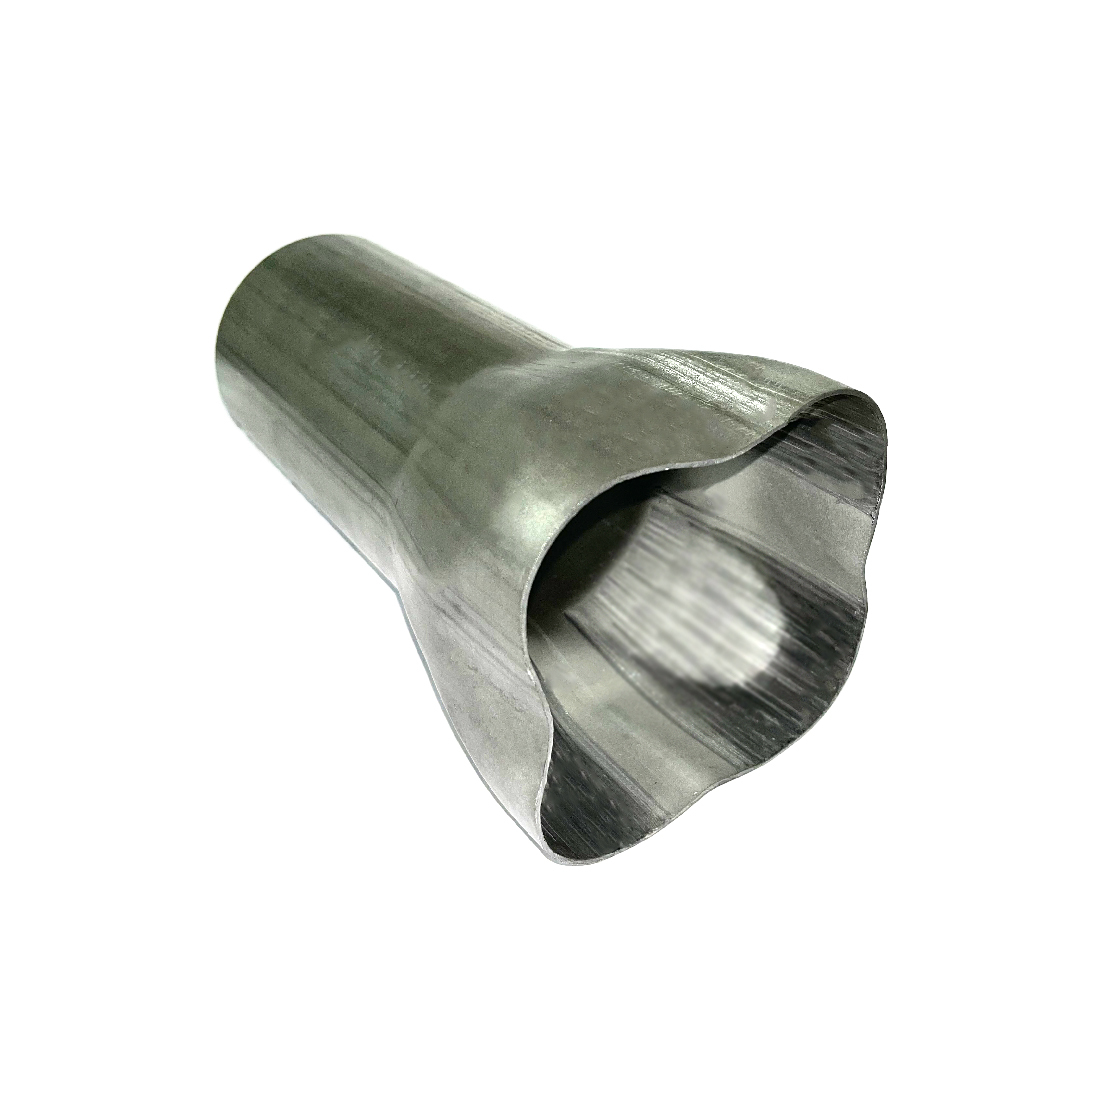 Collector Cone 4 into 1 - 51mm(2") In, 89mm(3.5") Out, Aluminised Mild Steel image